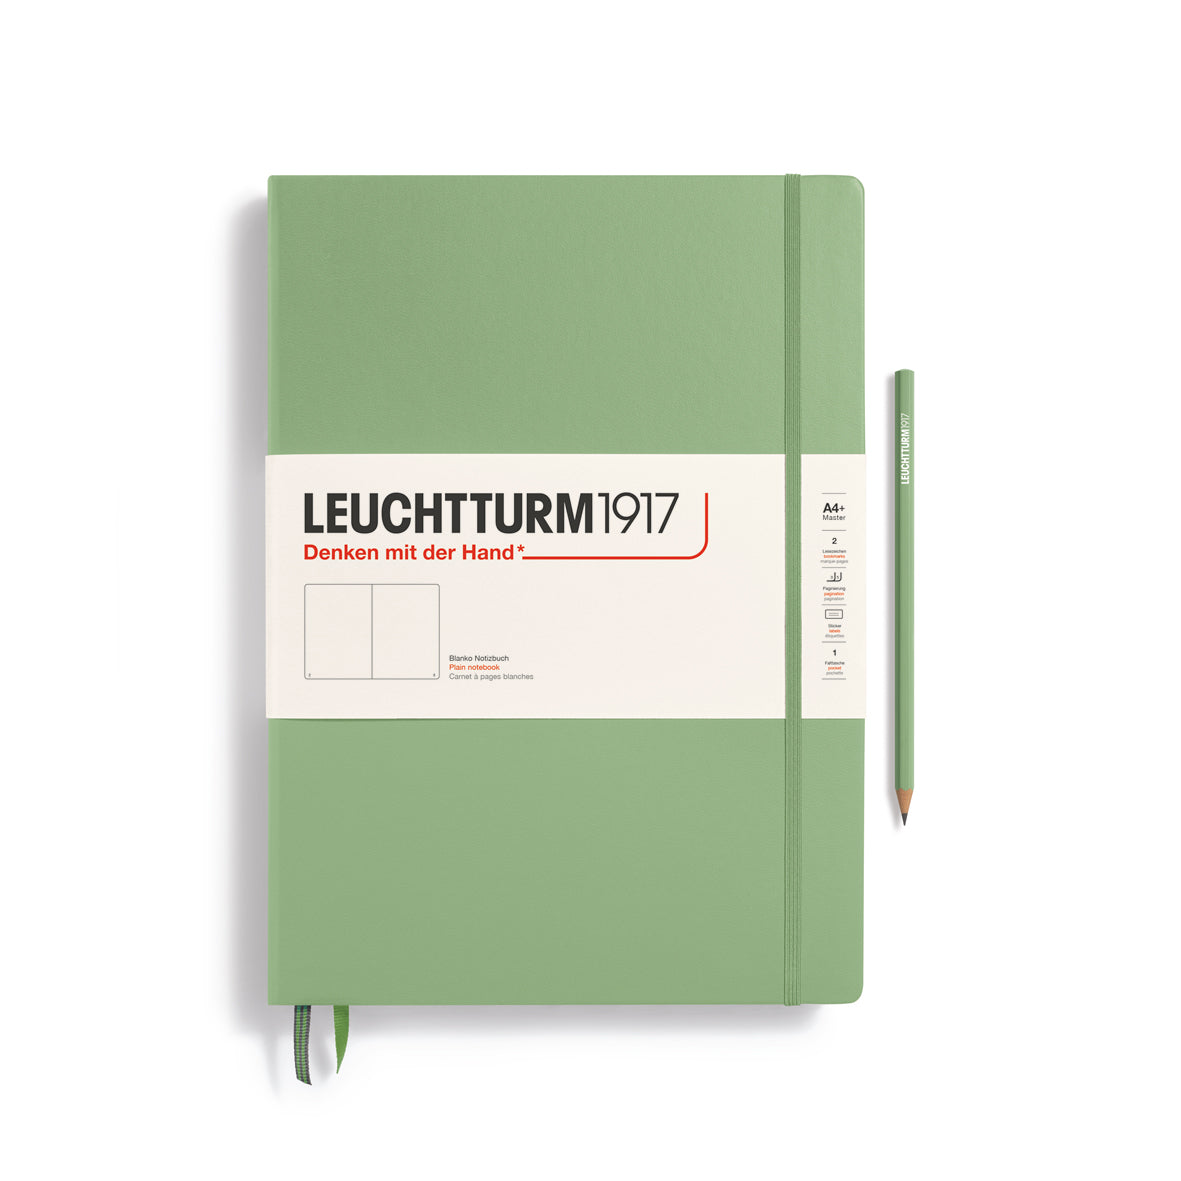 A large sage green notebook with a white paper band around it with the logo of the brand Leuchtturm1917. Below this is an image of the page ruling inside - in this case, plain or blank. It has two page marker ribbons showing at the bottom near the binding and a matching colour elastic notebook closure holding it neatly together. A sage green Leuchtturm pencil is shown at the side of the book.